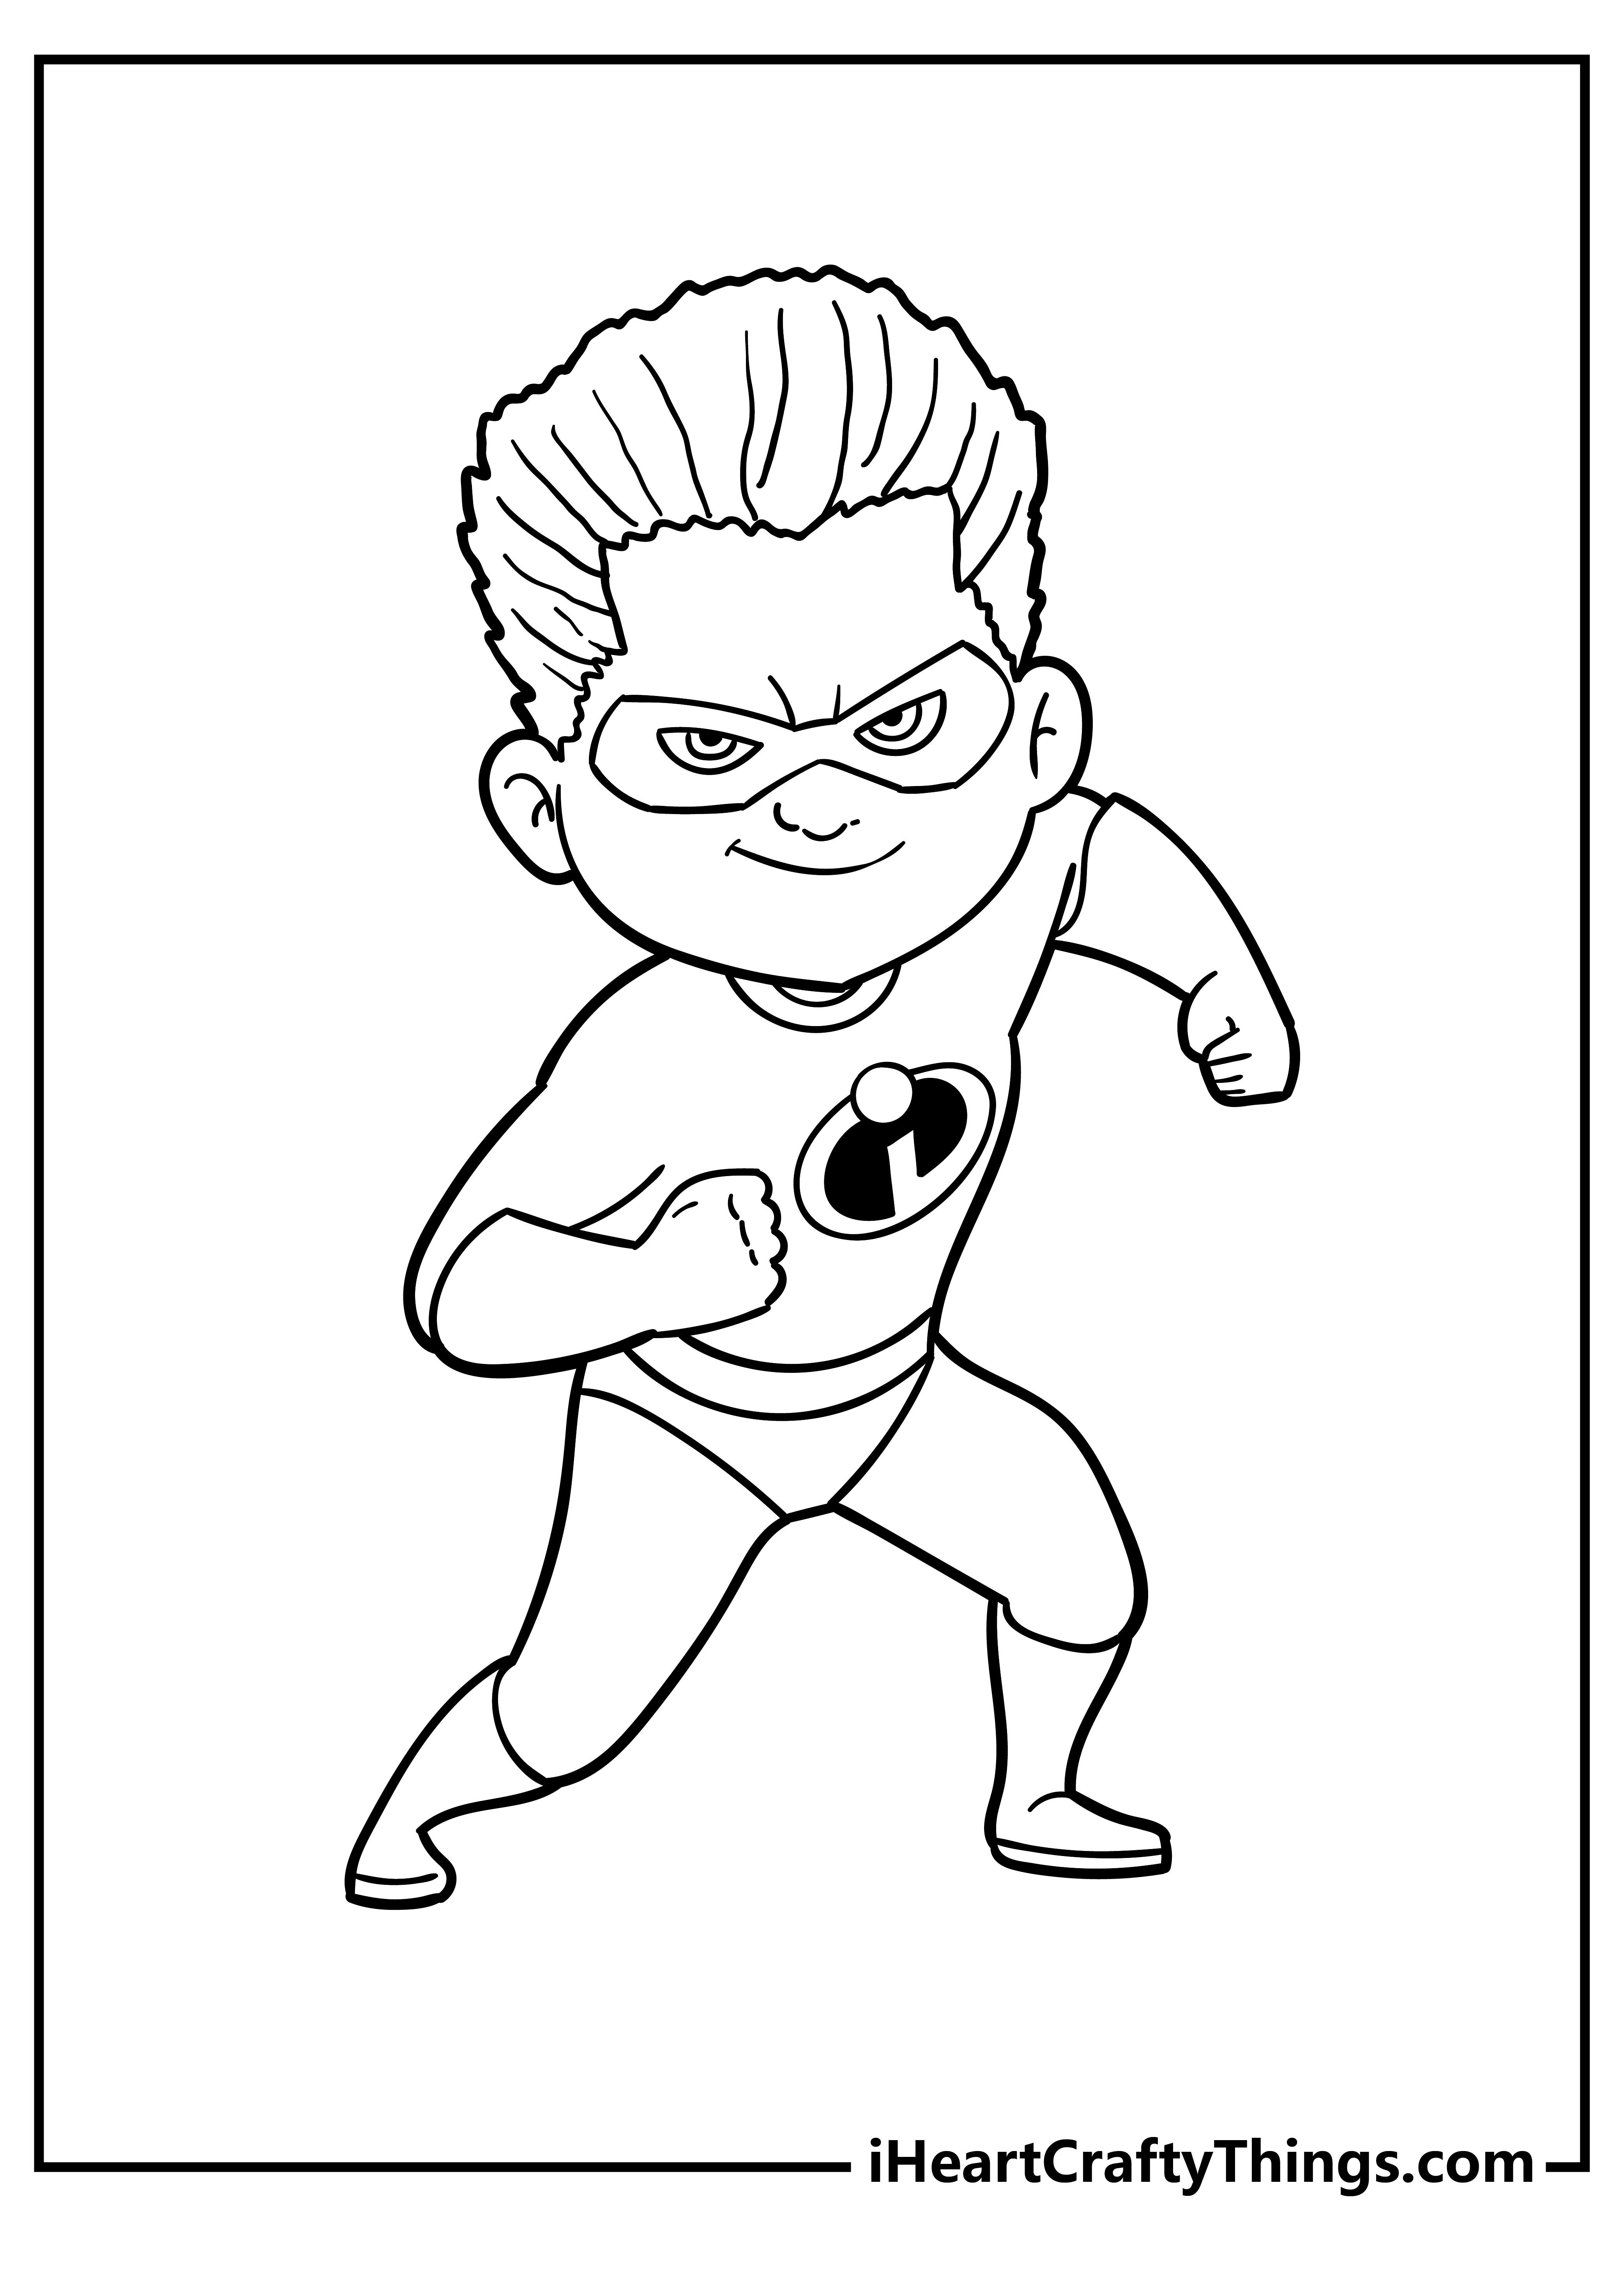 Superheroes Coloring Sheet for children free download